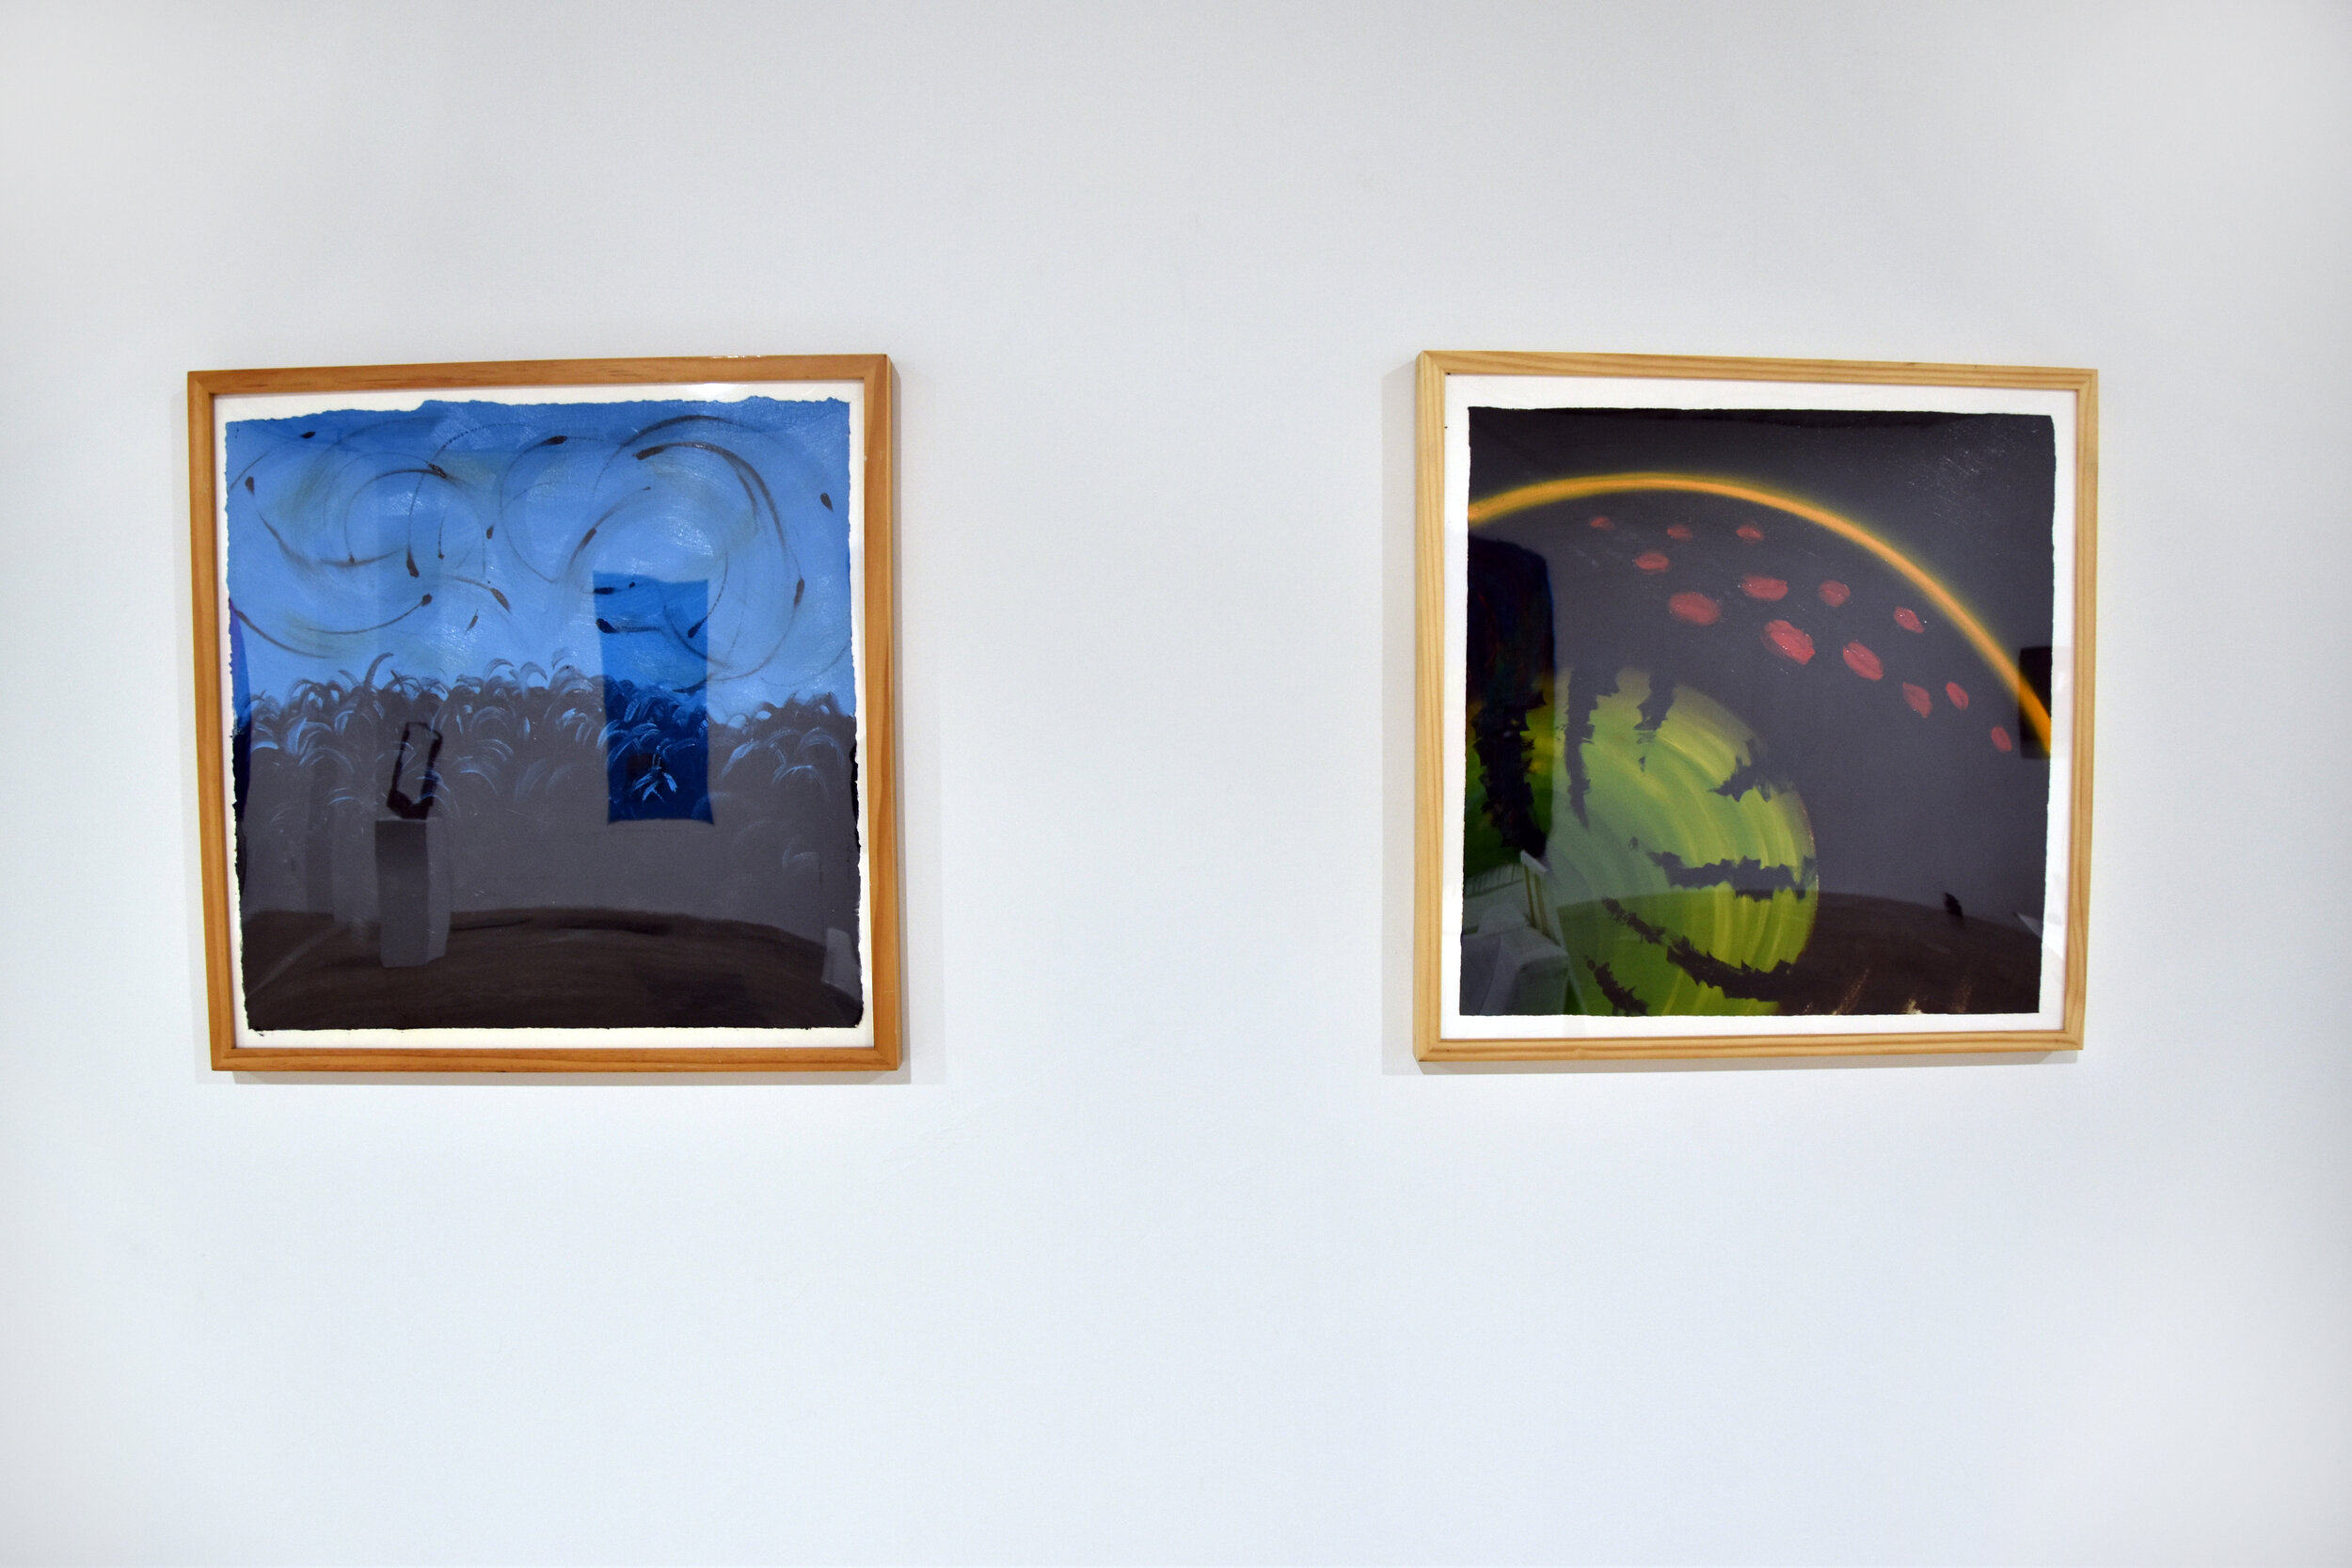 Left Image:  Them, Oil on Paper / Right Image: Static Age, Oil on Paper